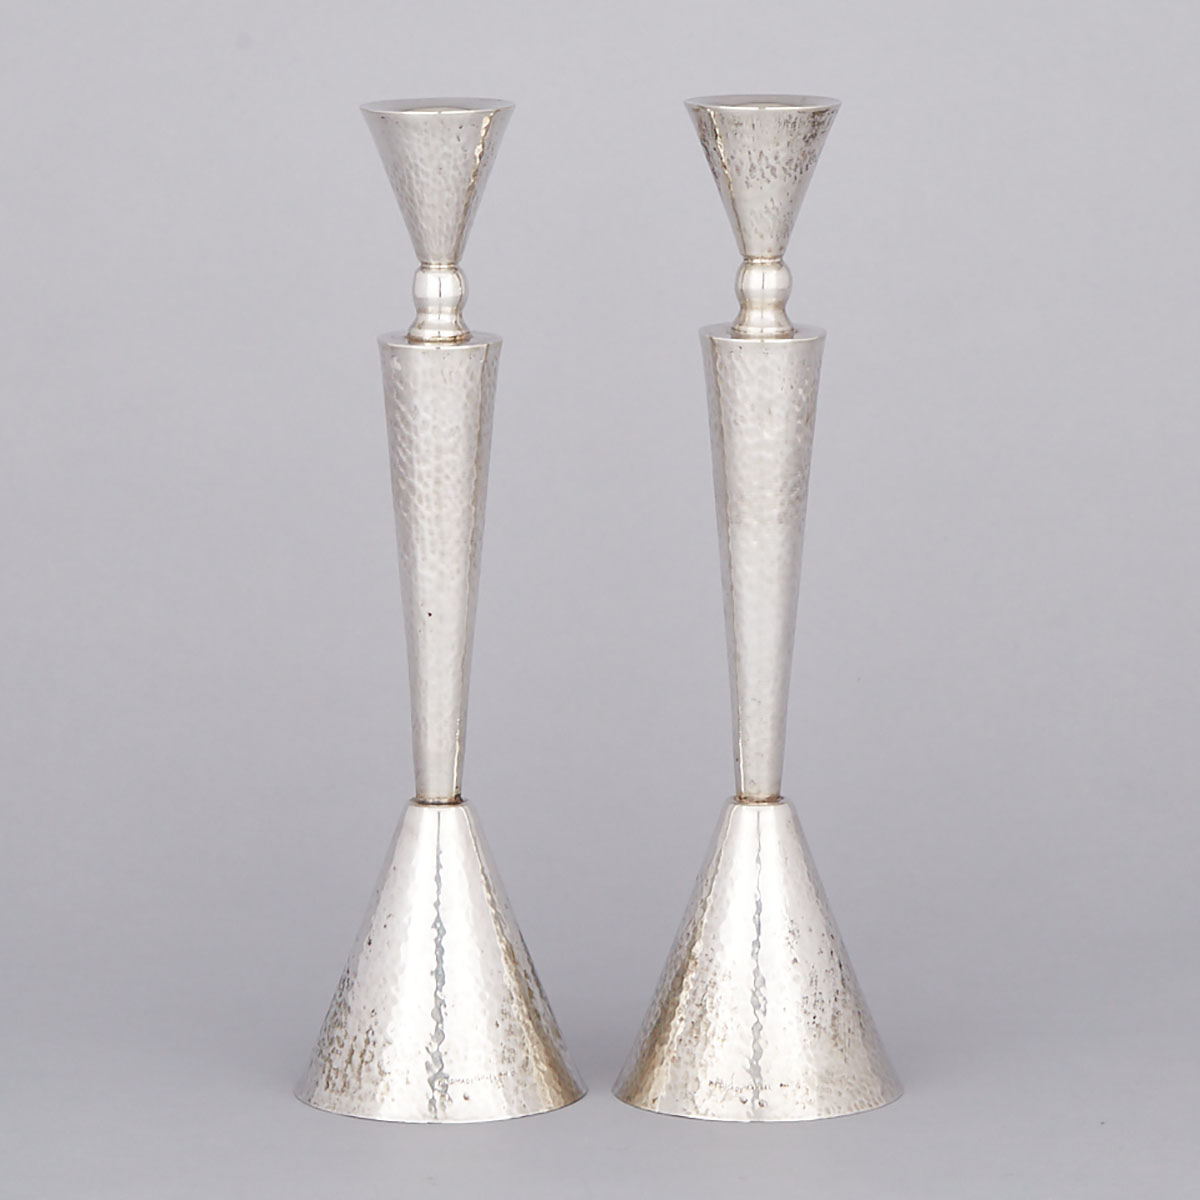 Pair of Israeli Silver Table Candlesticks, 20th century